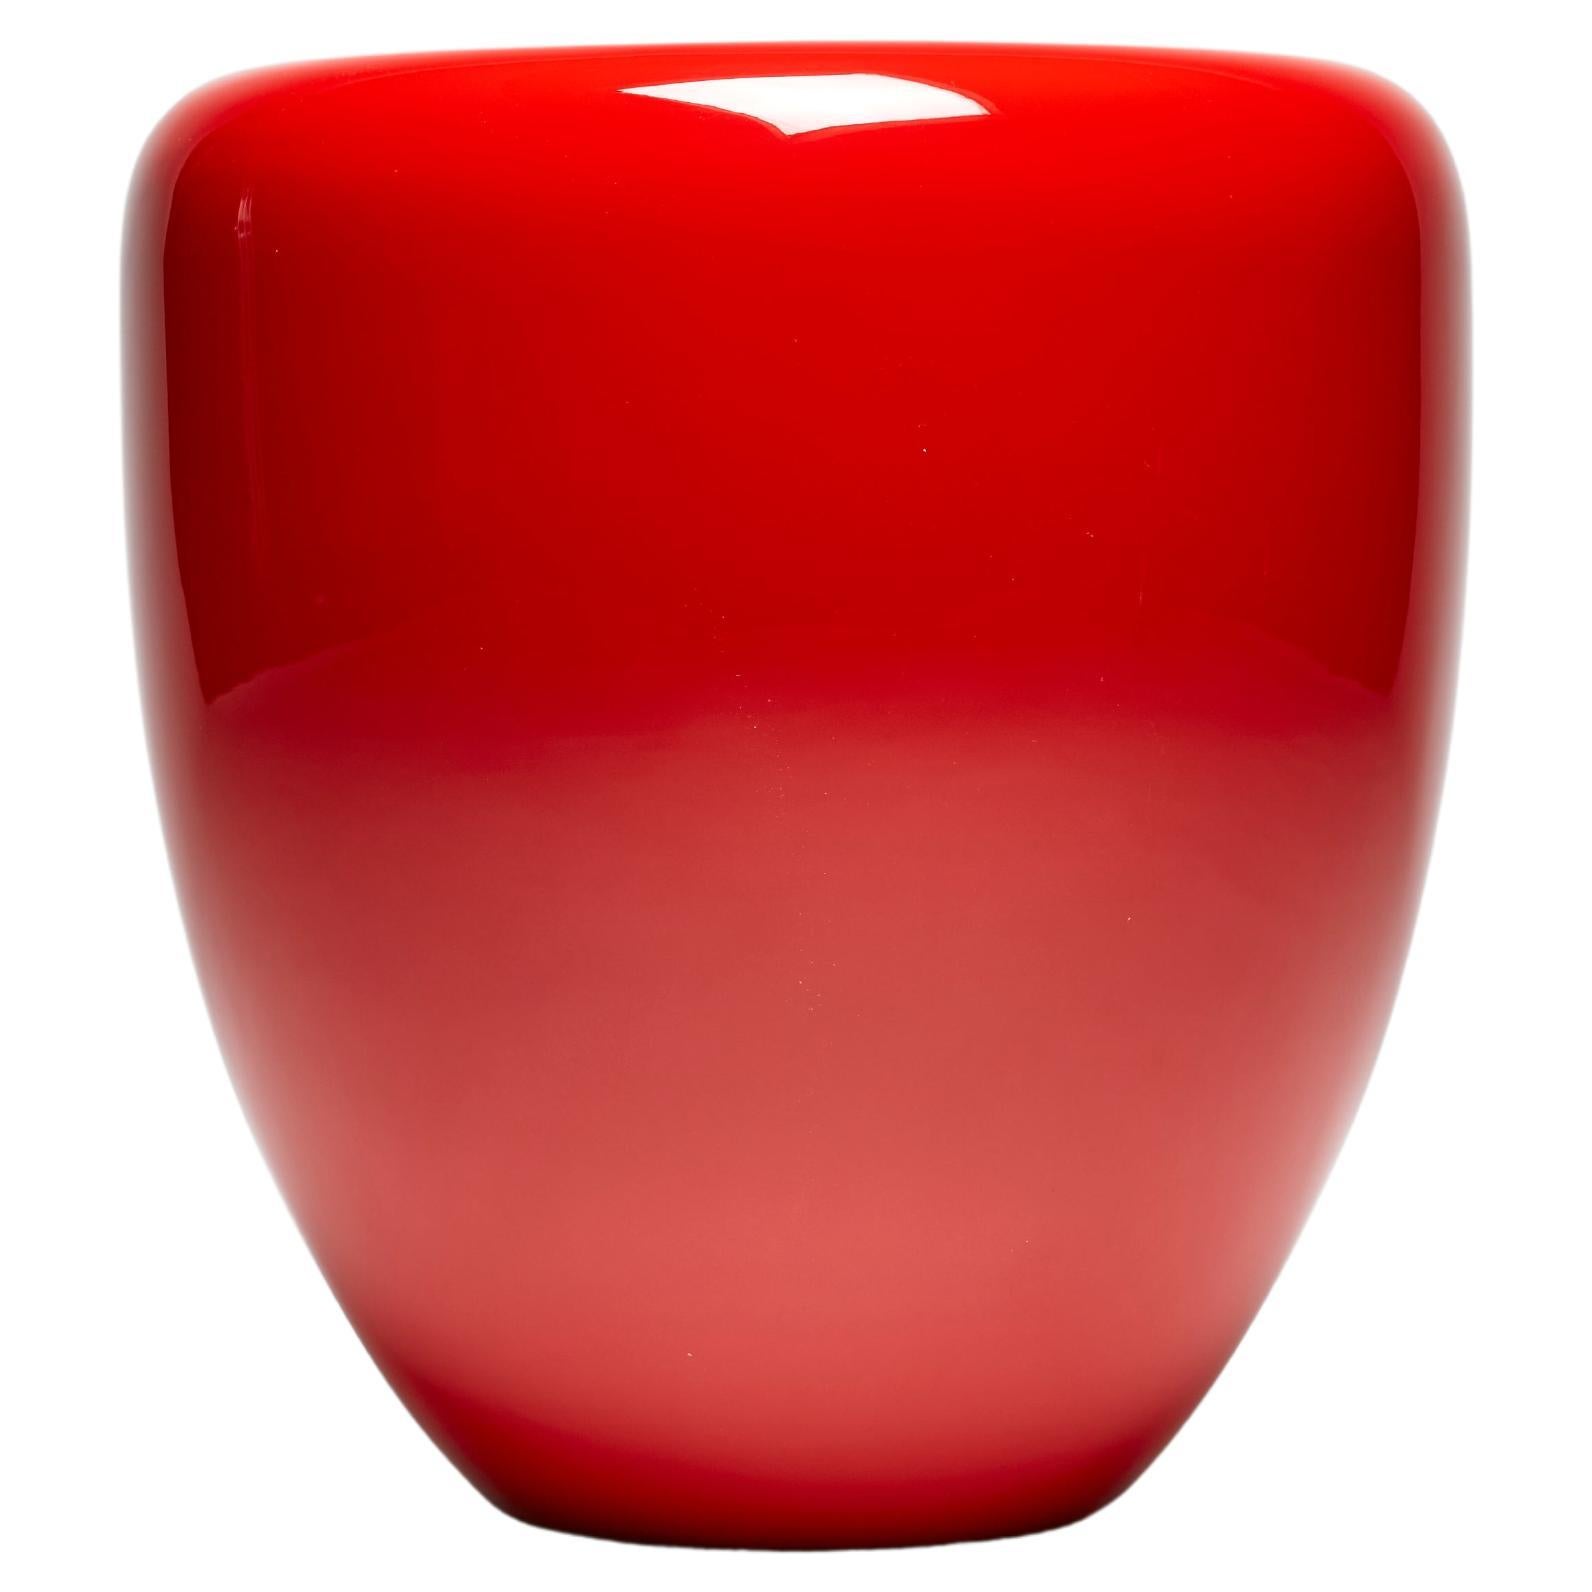 Side Table, Iconic Red DOT by Reda Amalou Design, 2017 - Glossy or mate lacquer  For Sale